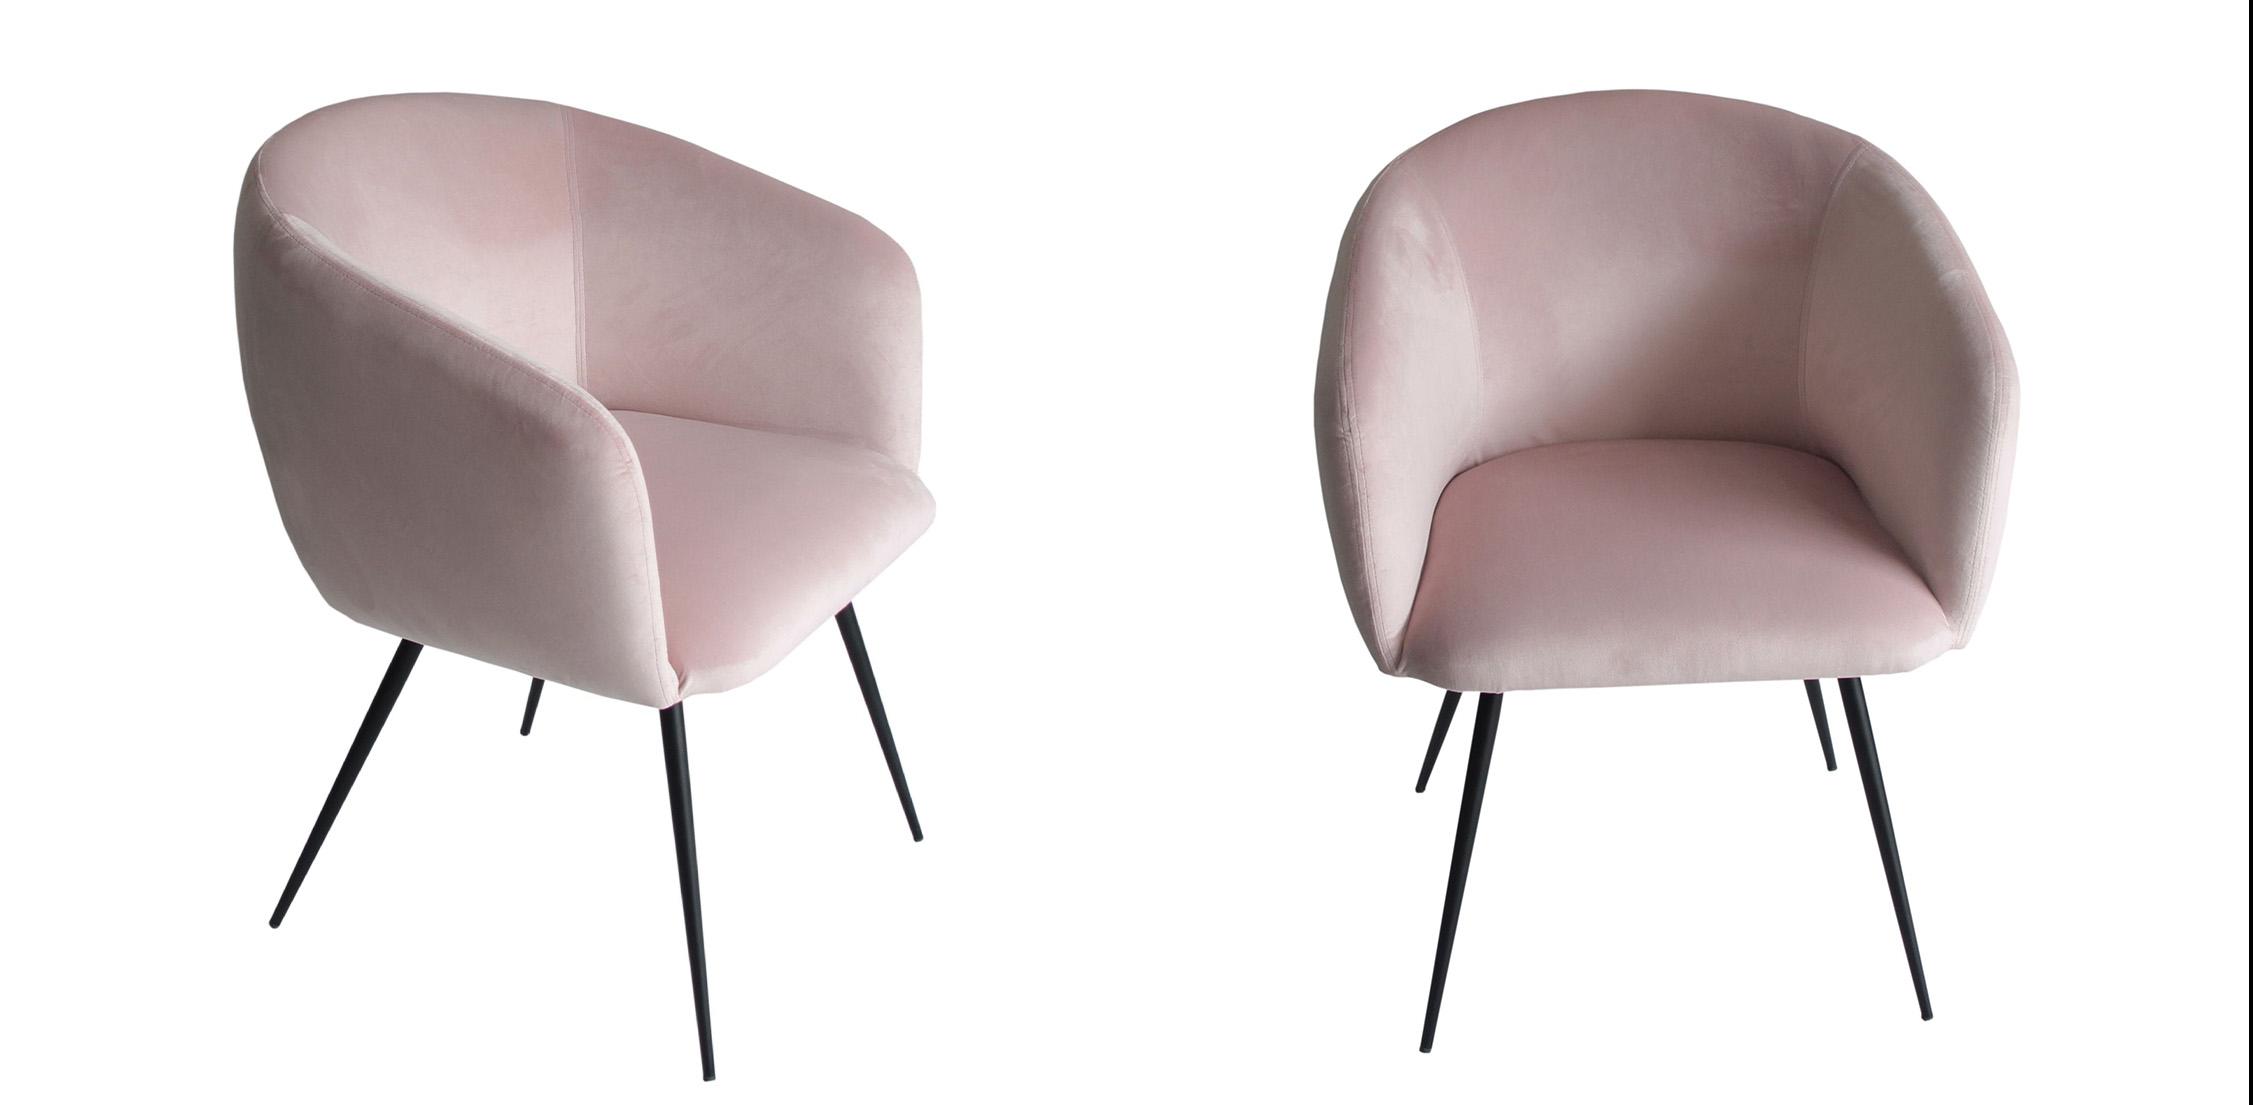 Contemporary, Modern Dining Chair Set VGYFDC1041-PNK-DC-Set-2 VGYFDC1041-PNK-DC-Set-2 in Pink Fabric